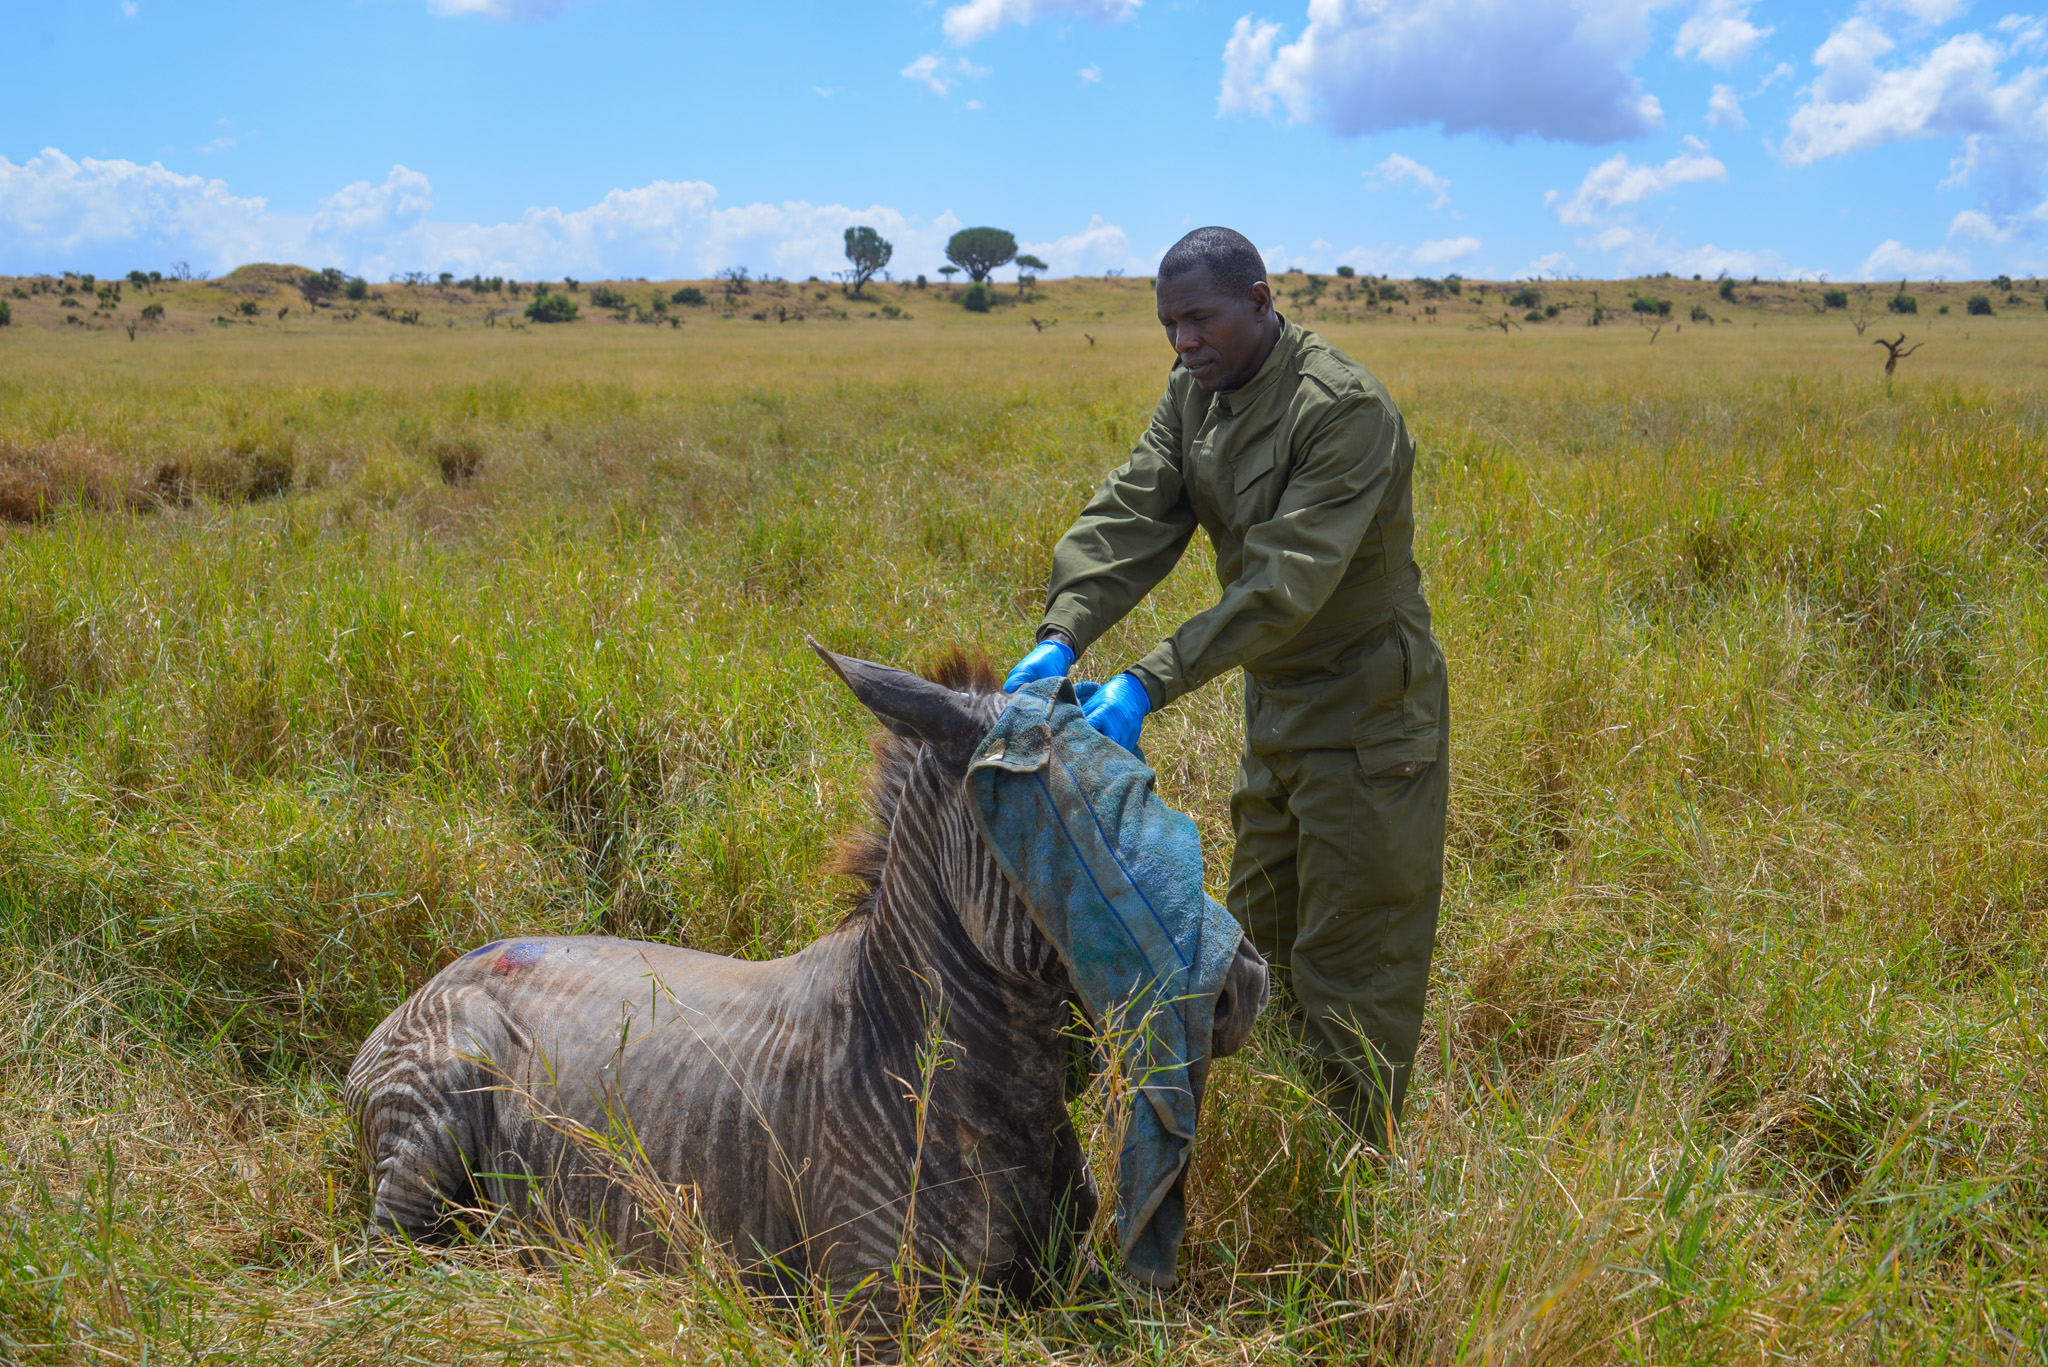 Conservation at Lewa Featured on CNN’s ‘Inside Africa’